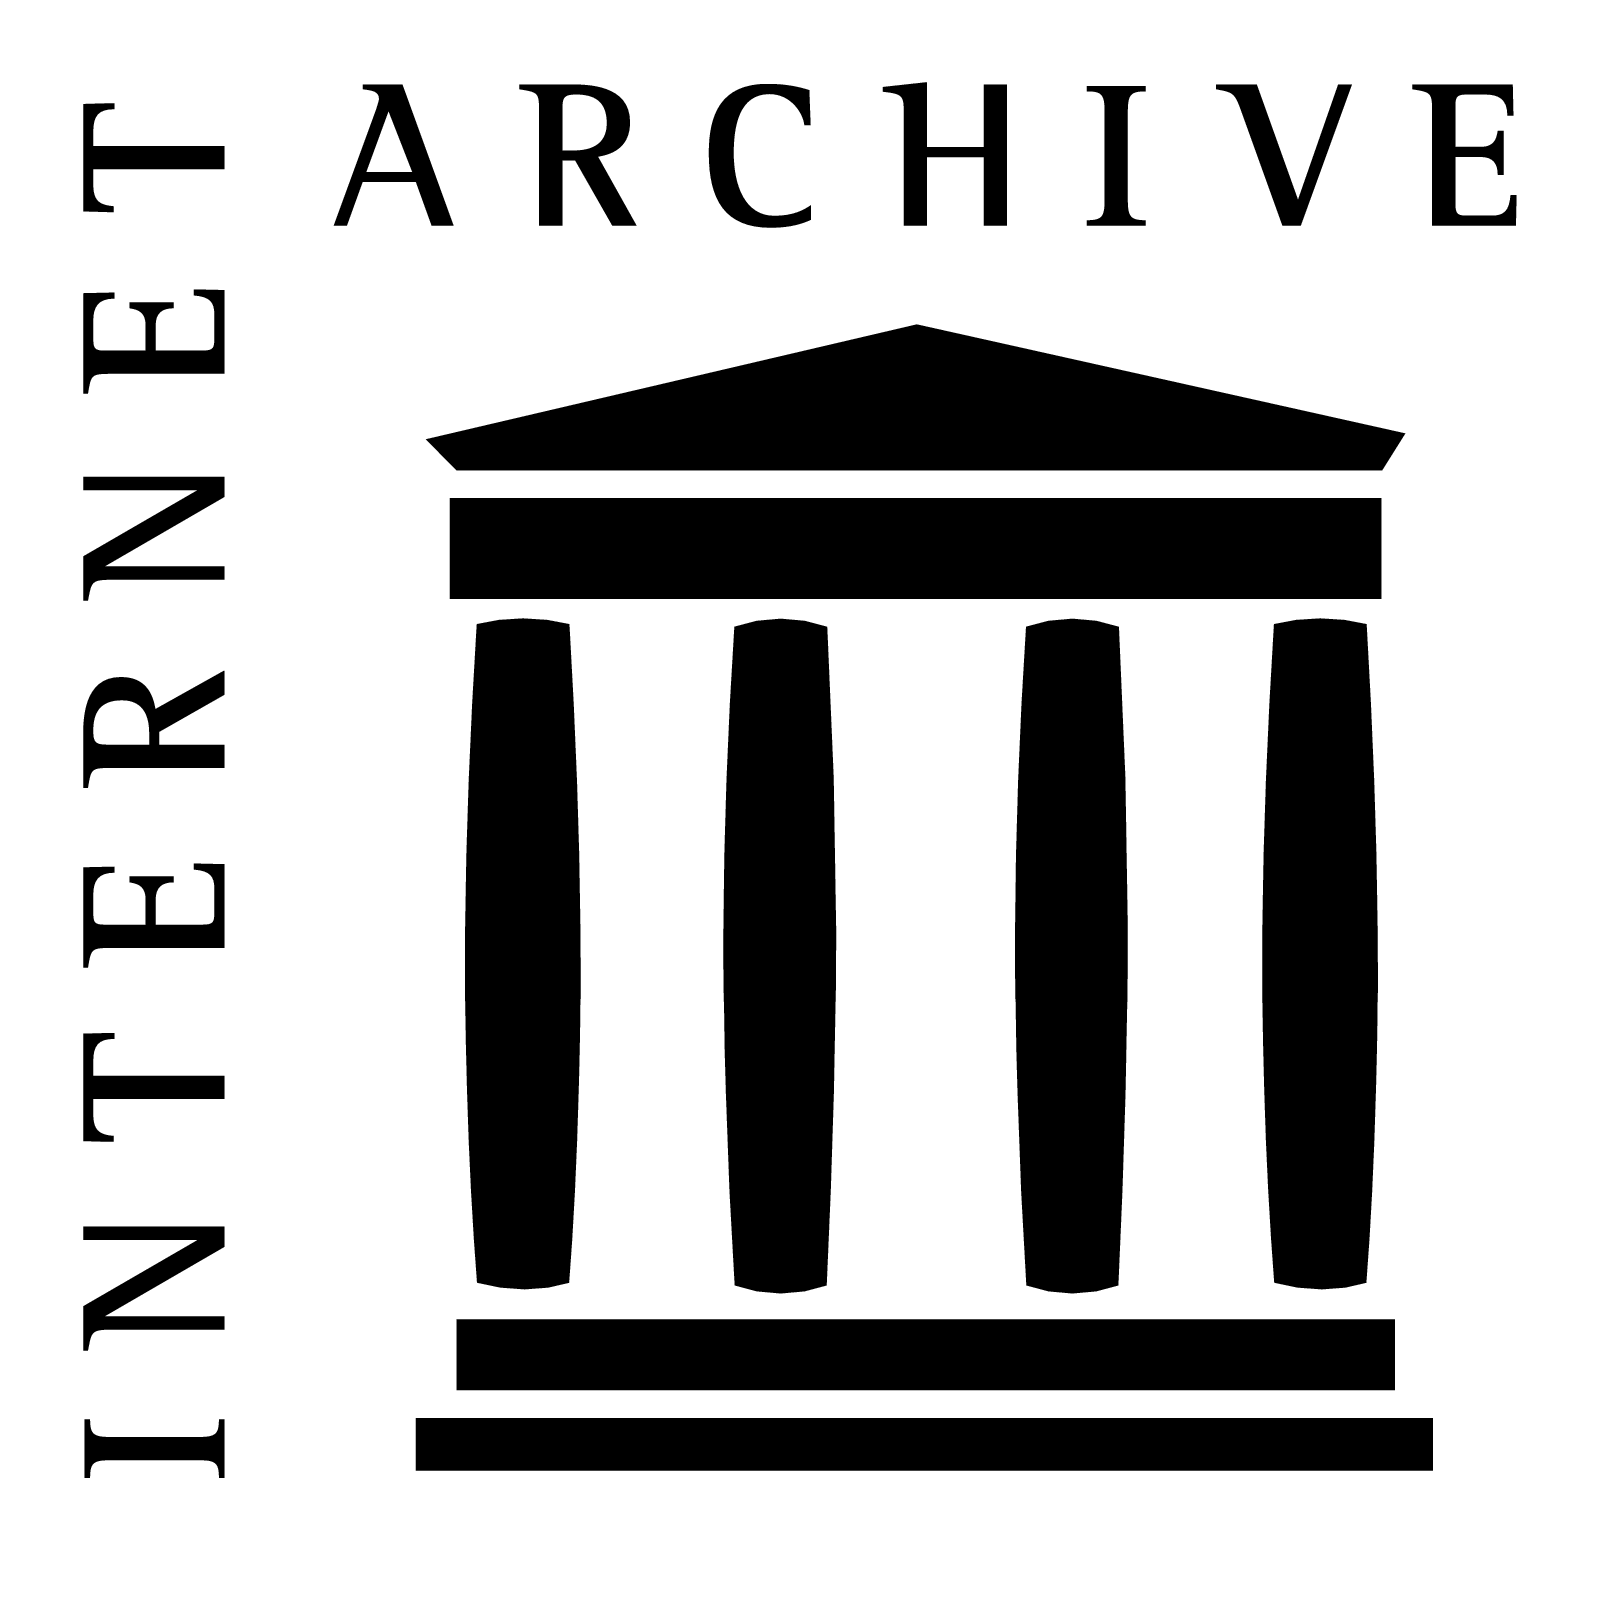 Archives Logo - Internet Archive logo and wordmark.png